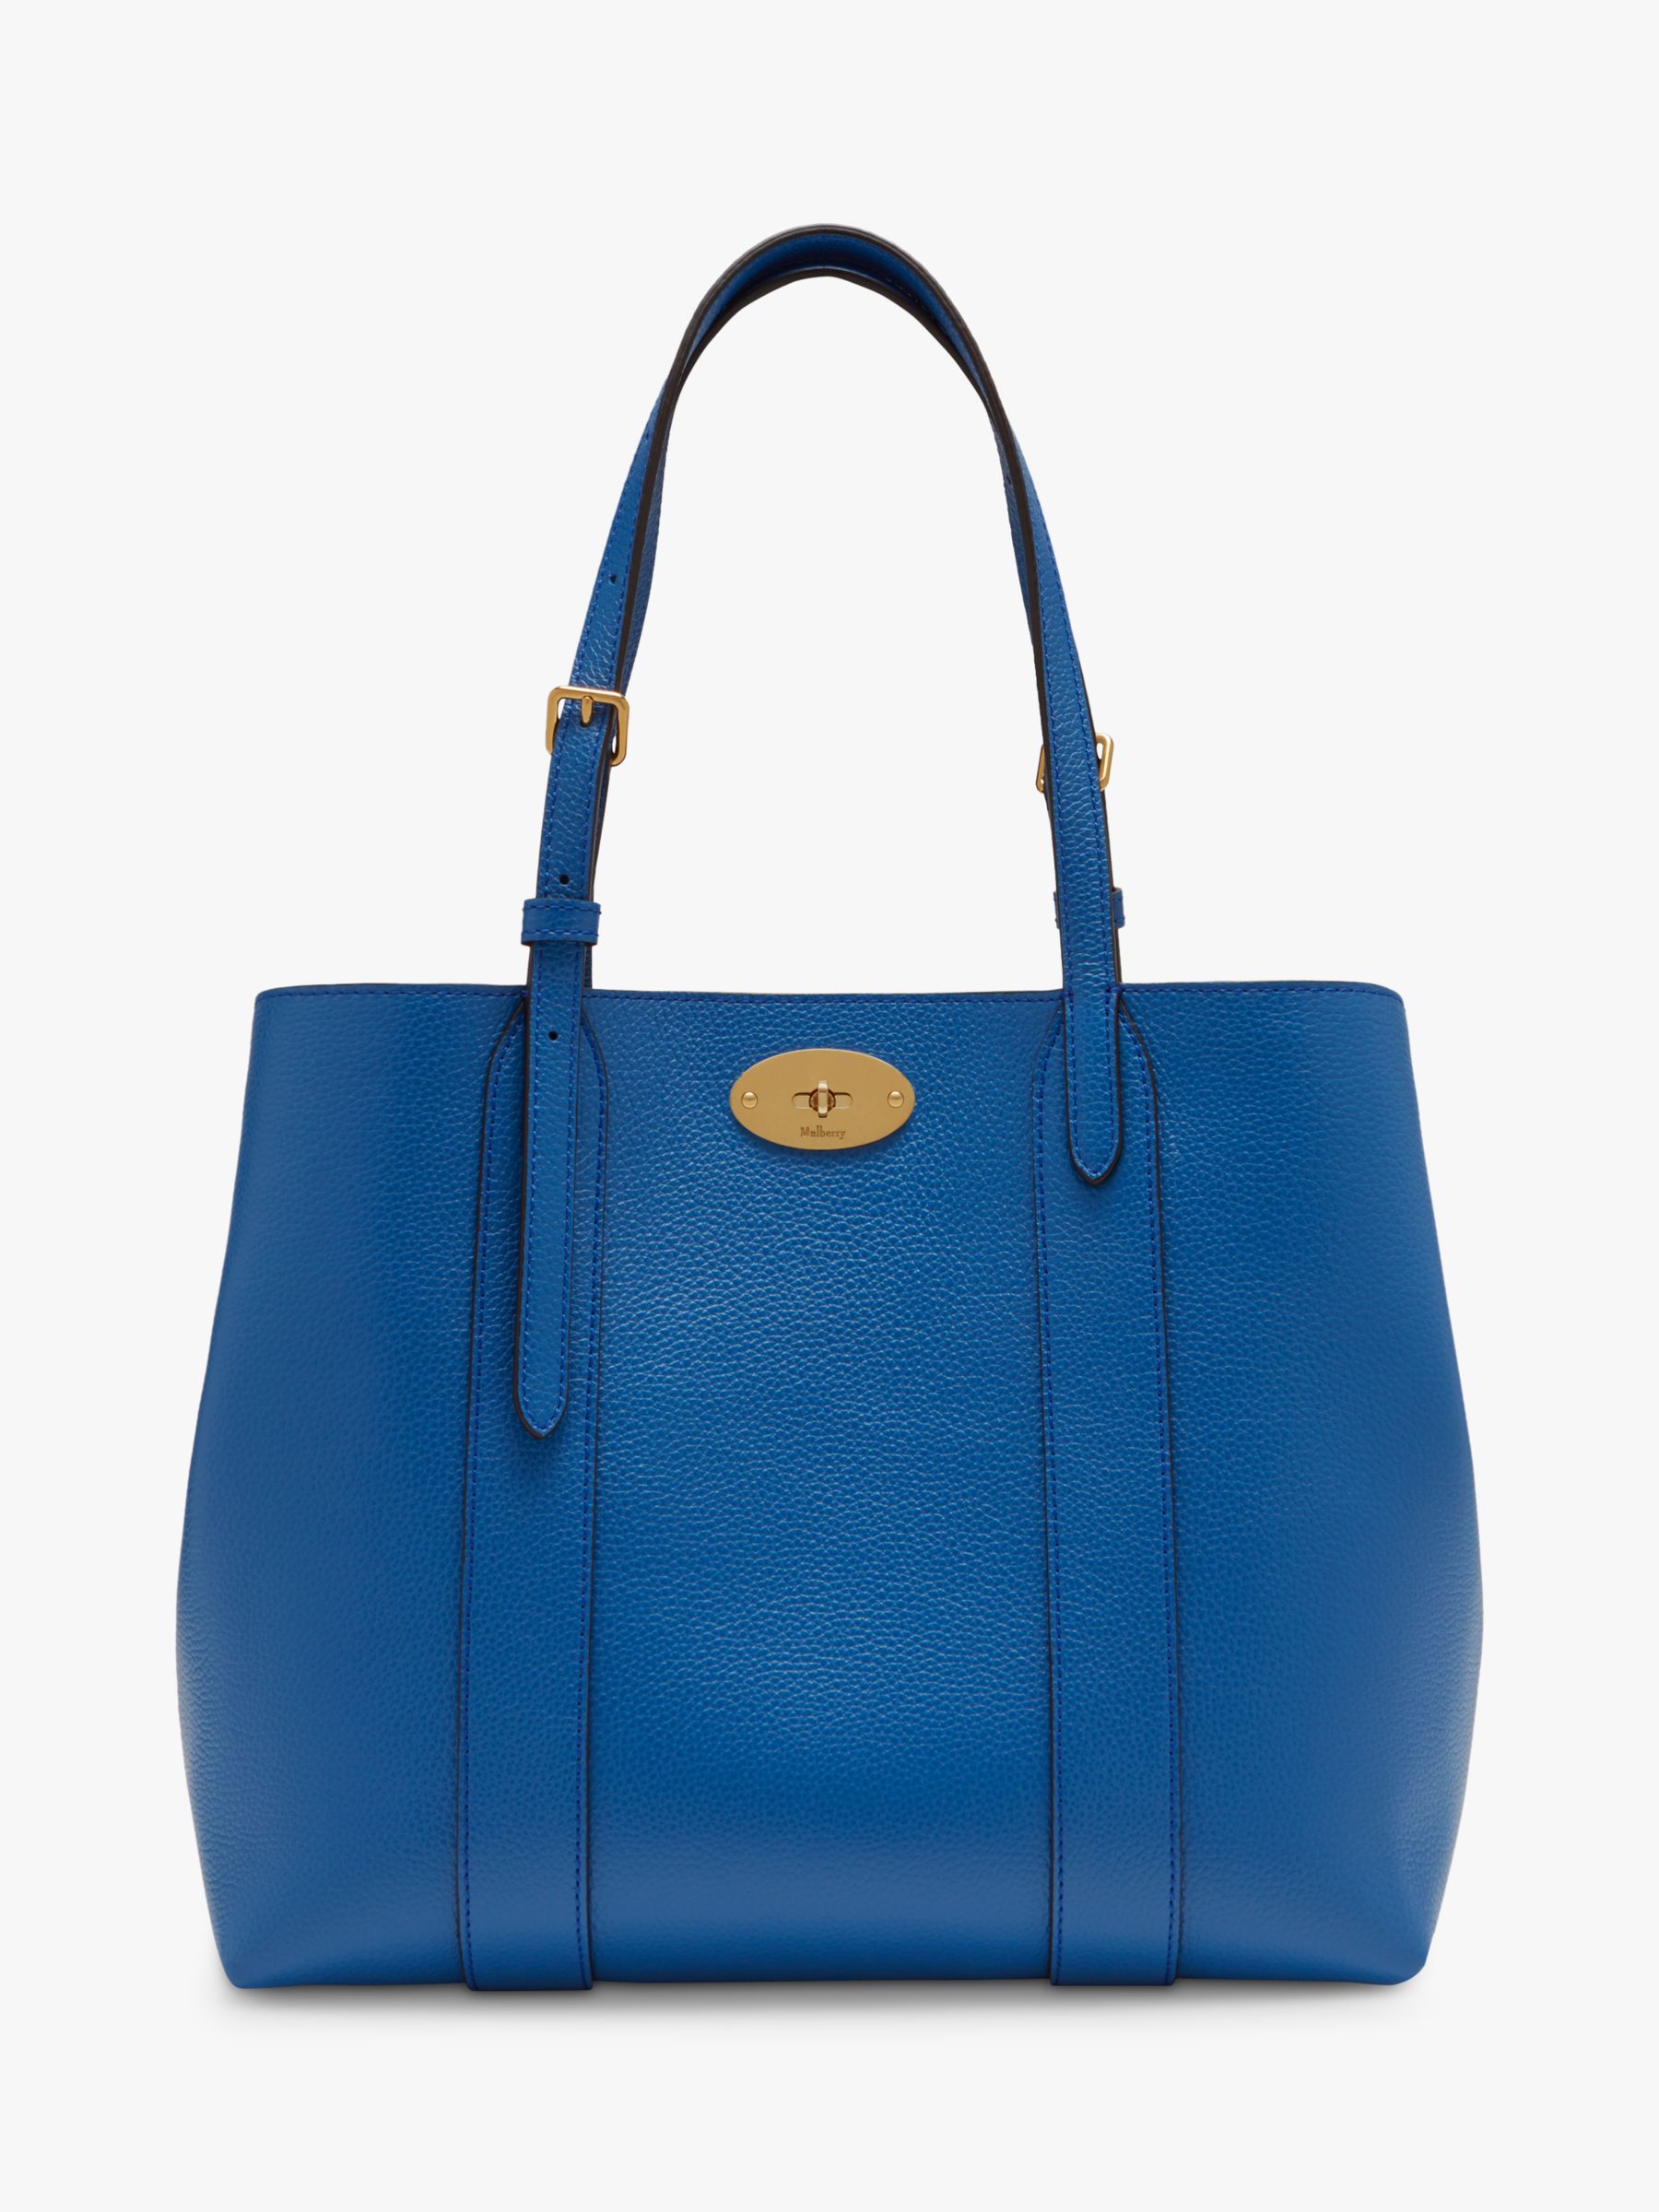 Mulberry Small Bayswater Classic Grain Leather Tote Bag, Porcelain Blue at John Lewis & Partners